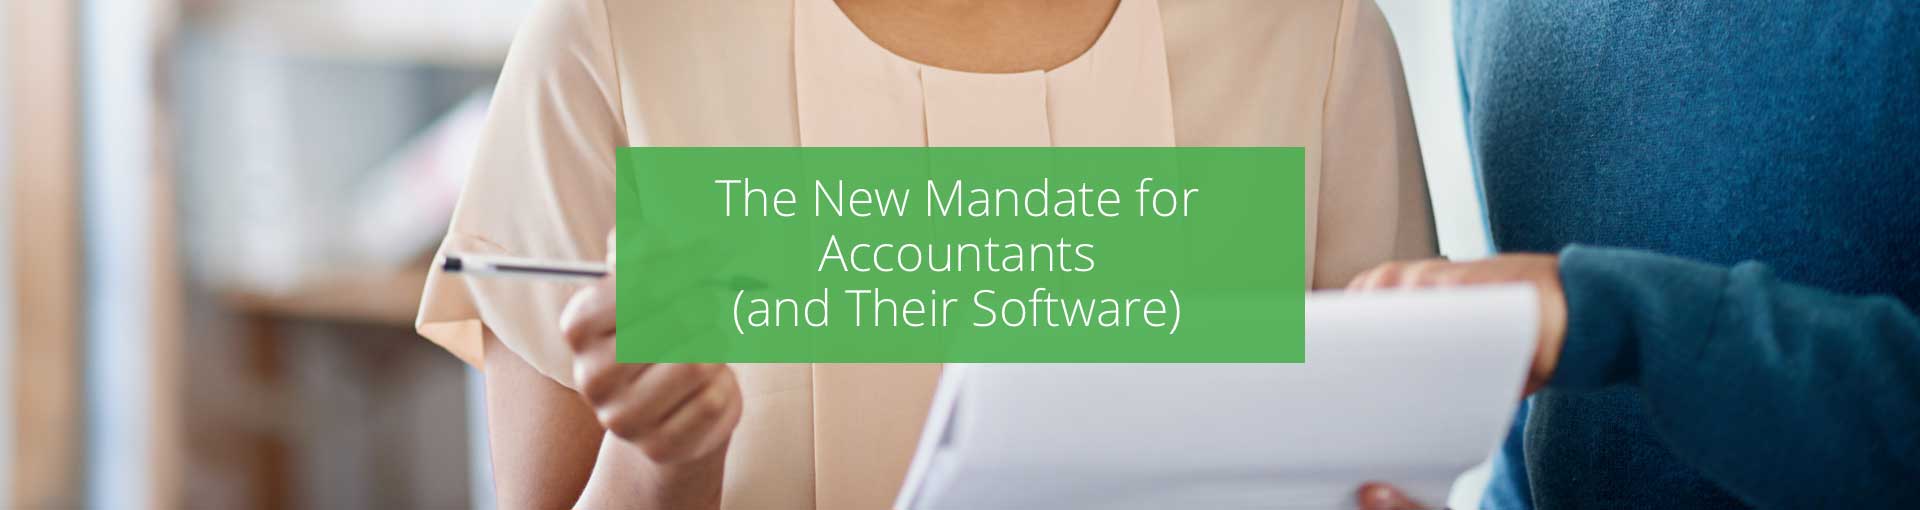 The New Mandate for Accountants (and Their Software) Featured Image